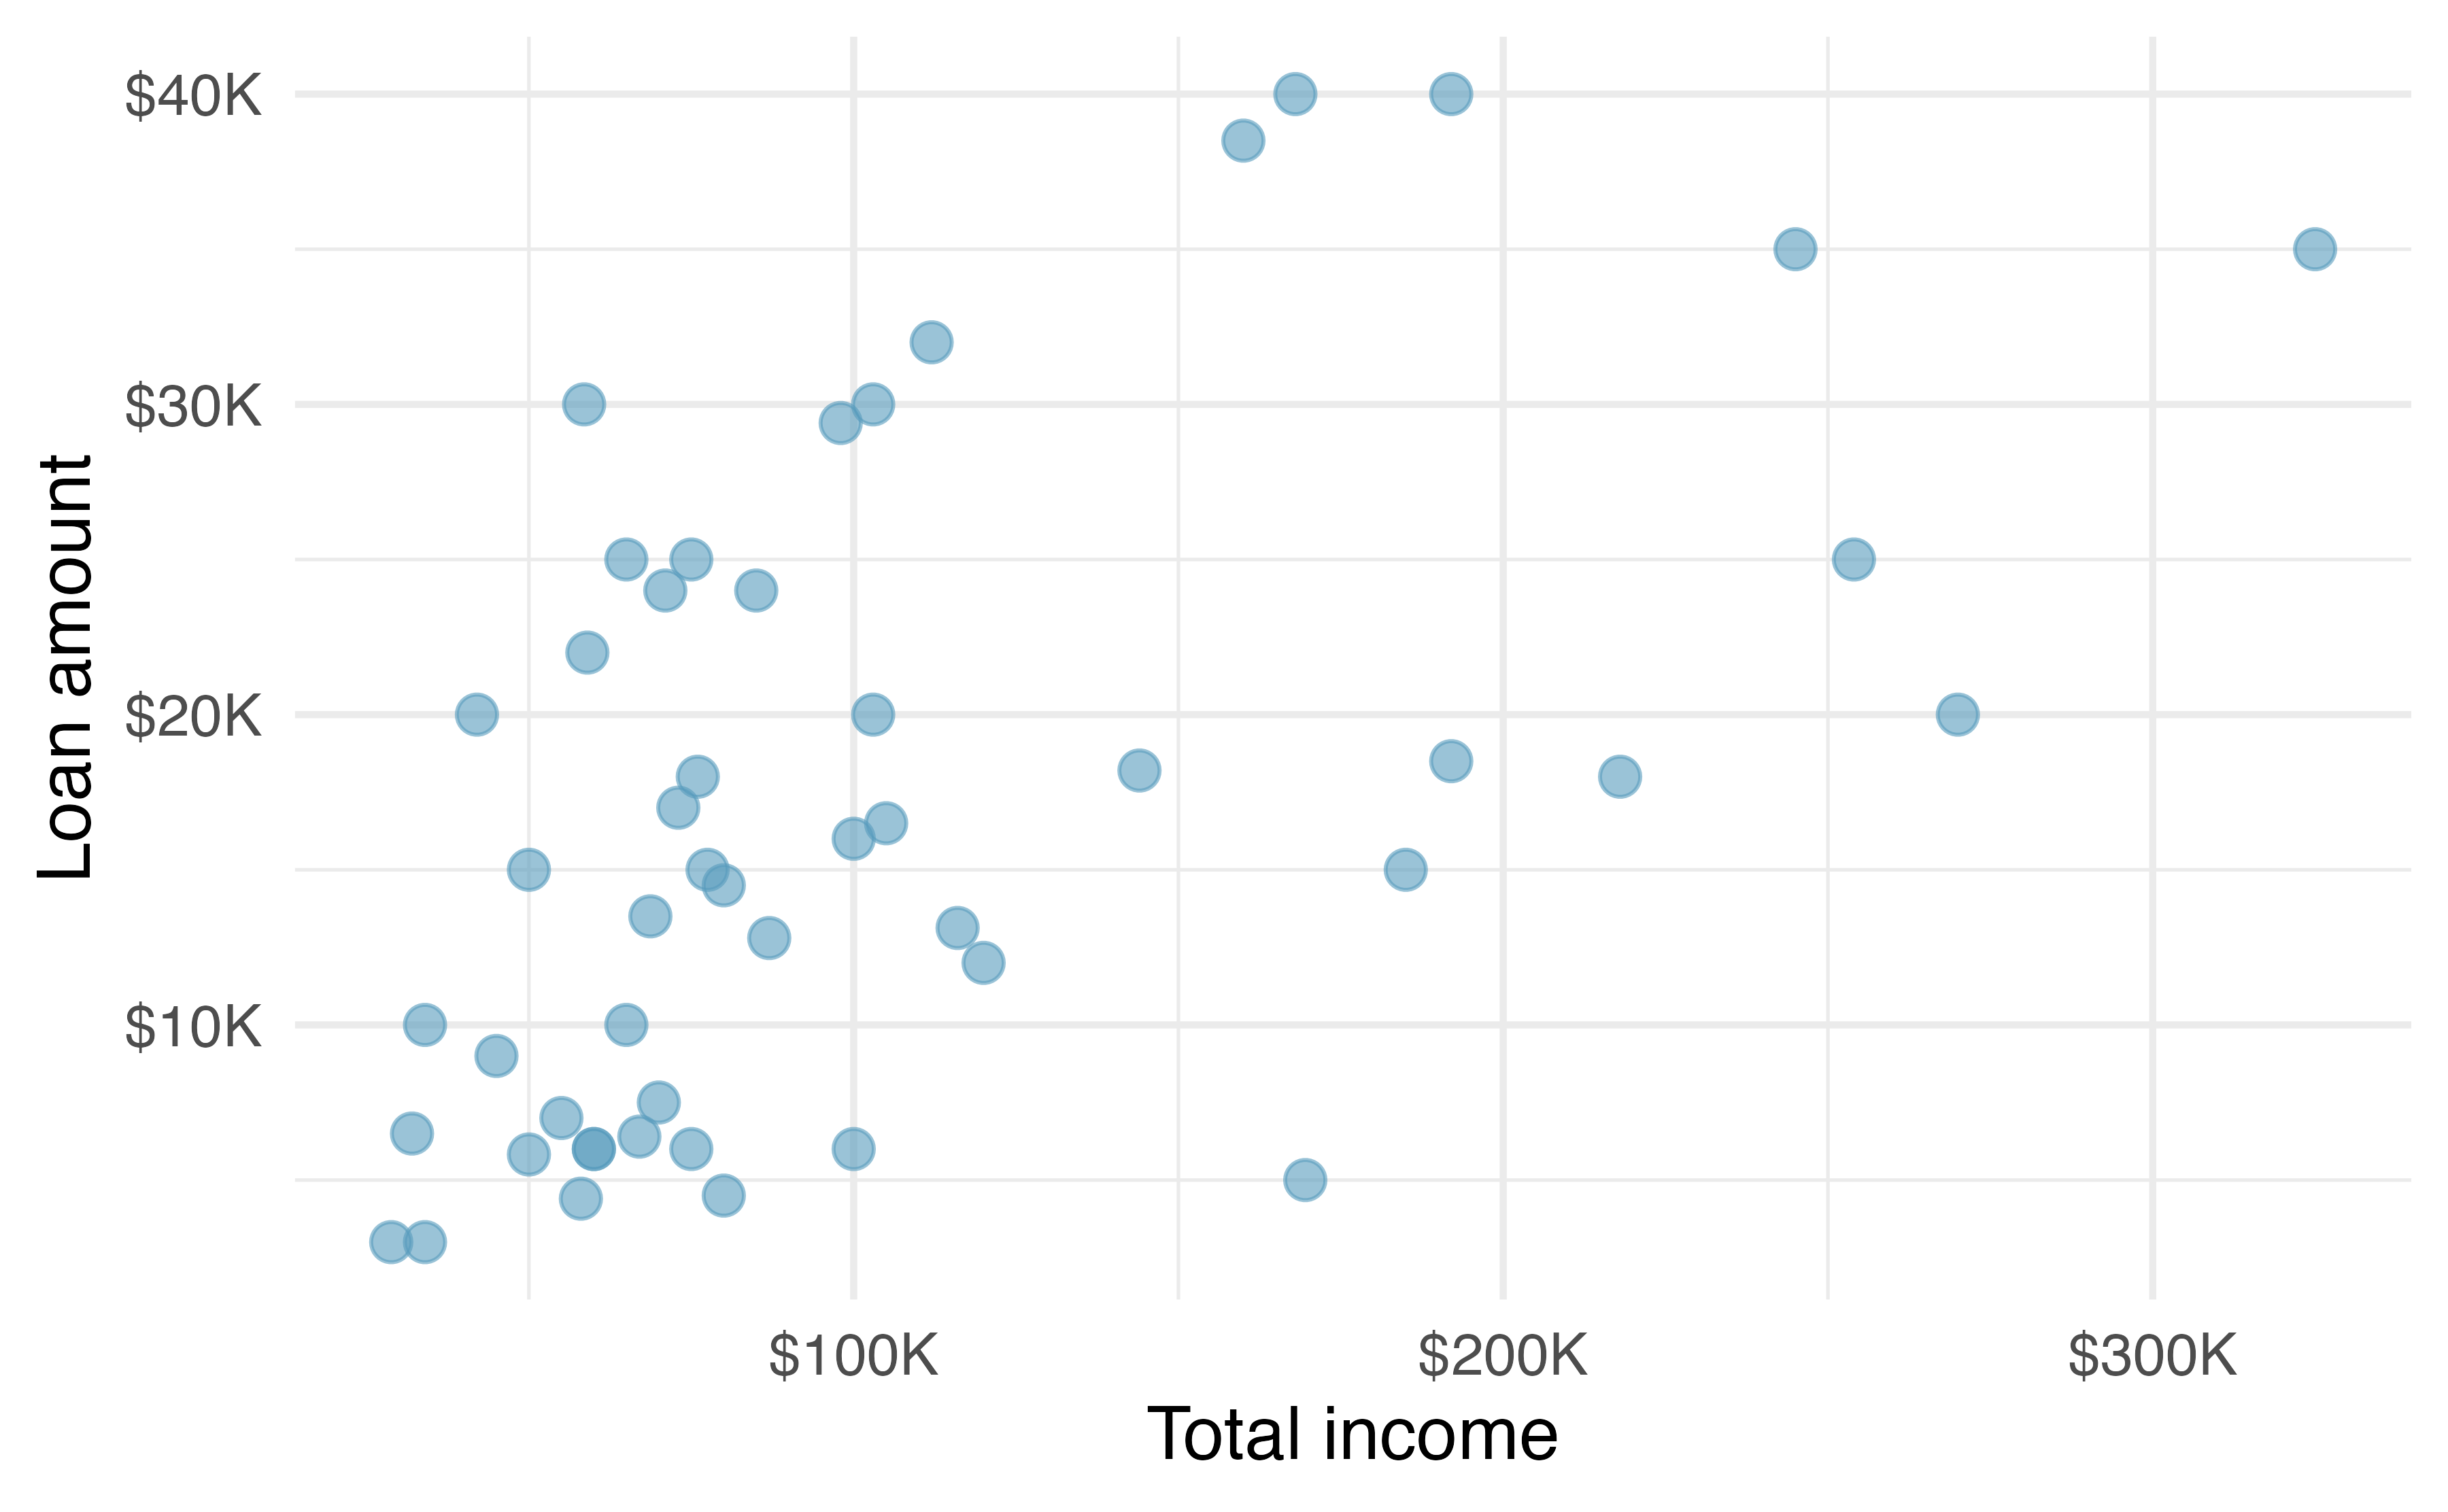 A scatter plot with total income on the x-axis and loan amount on the y-axis.  The relationship is moderately positive.